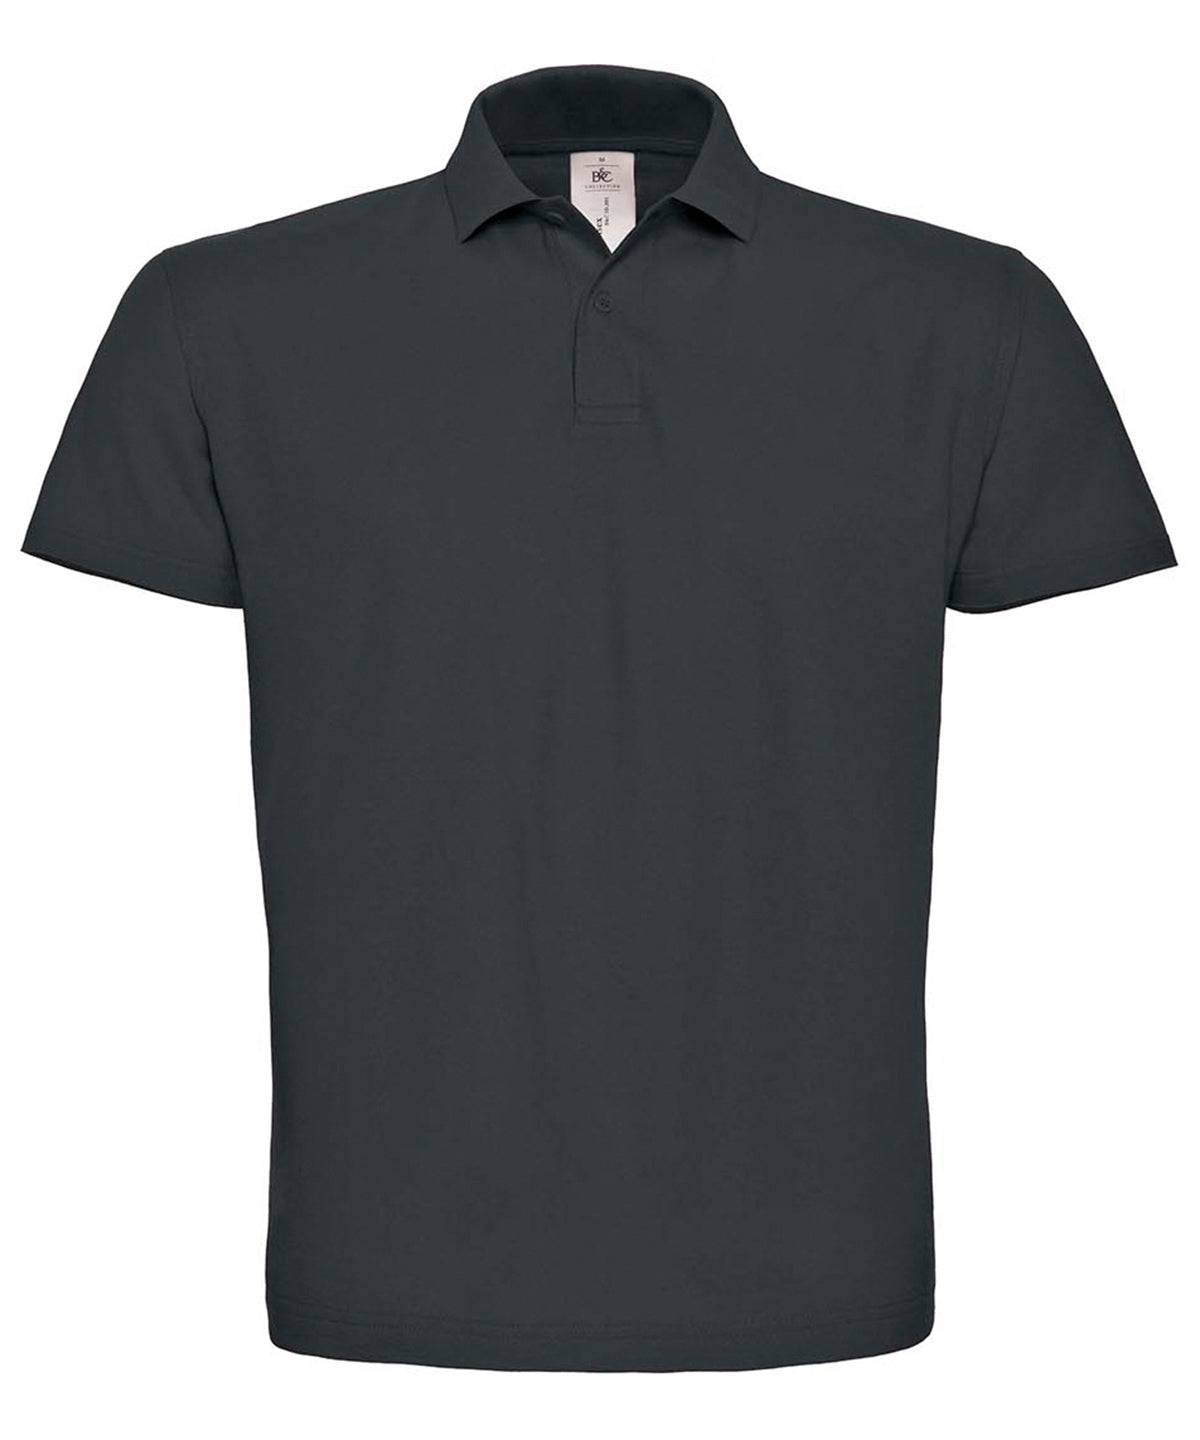 Anthracite - B&C ID.001 polo